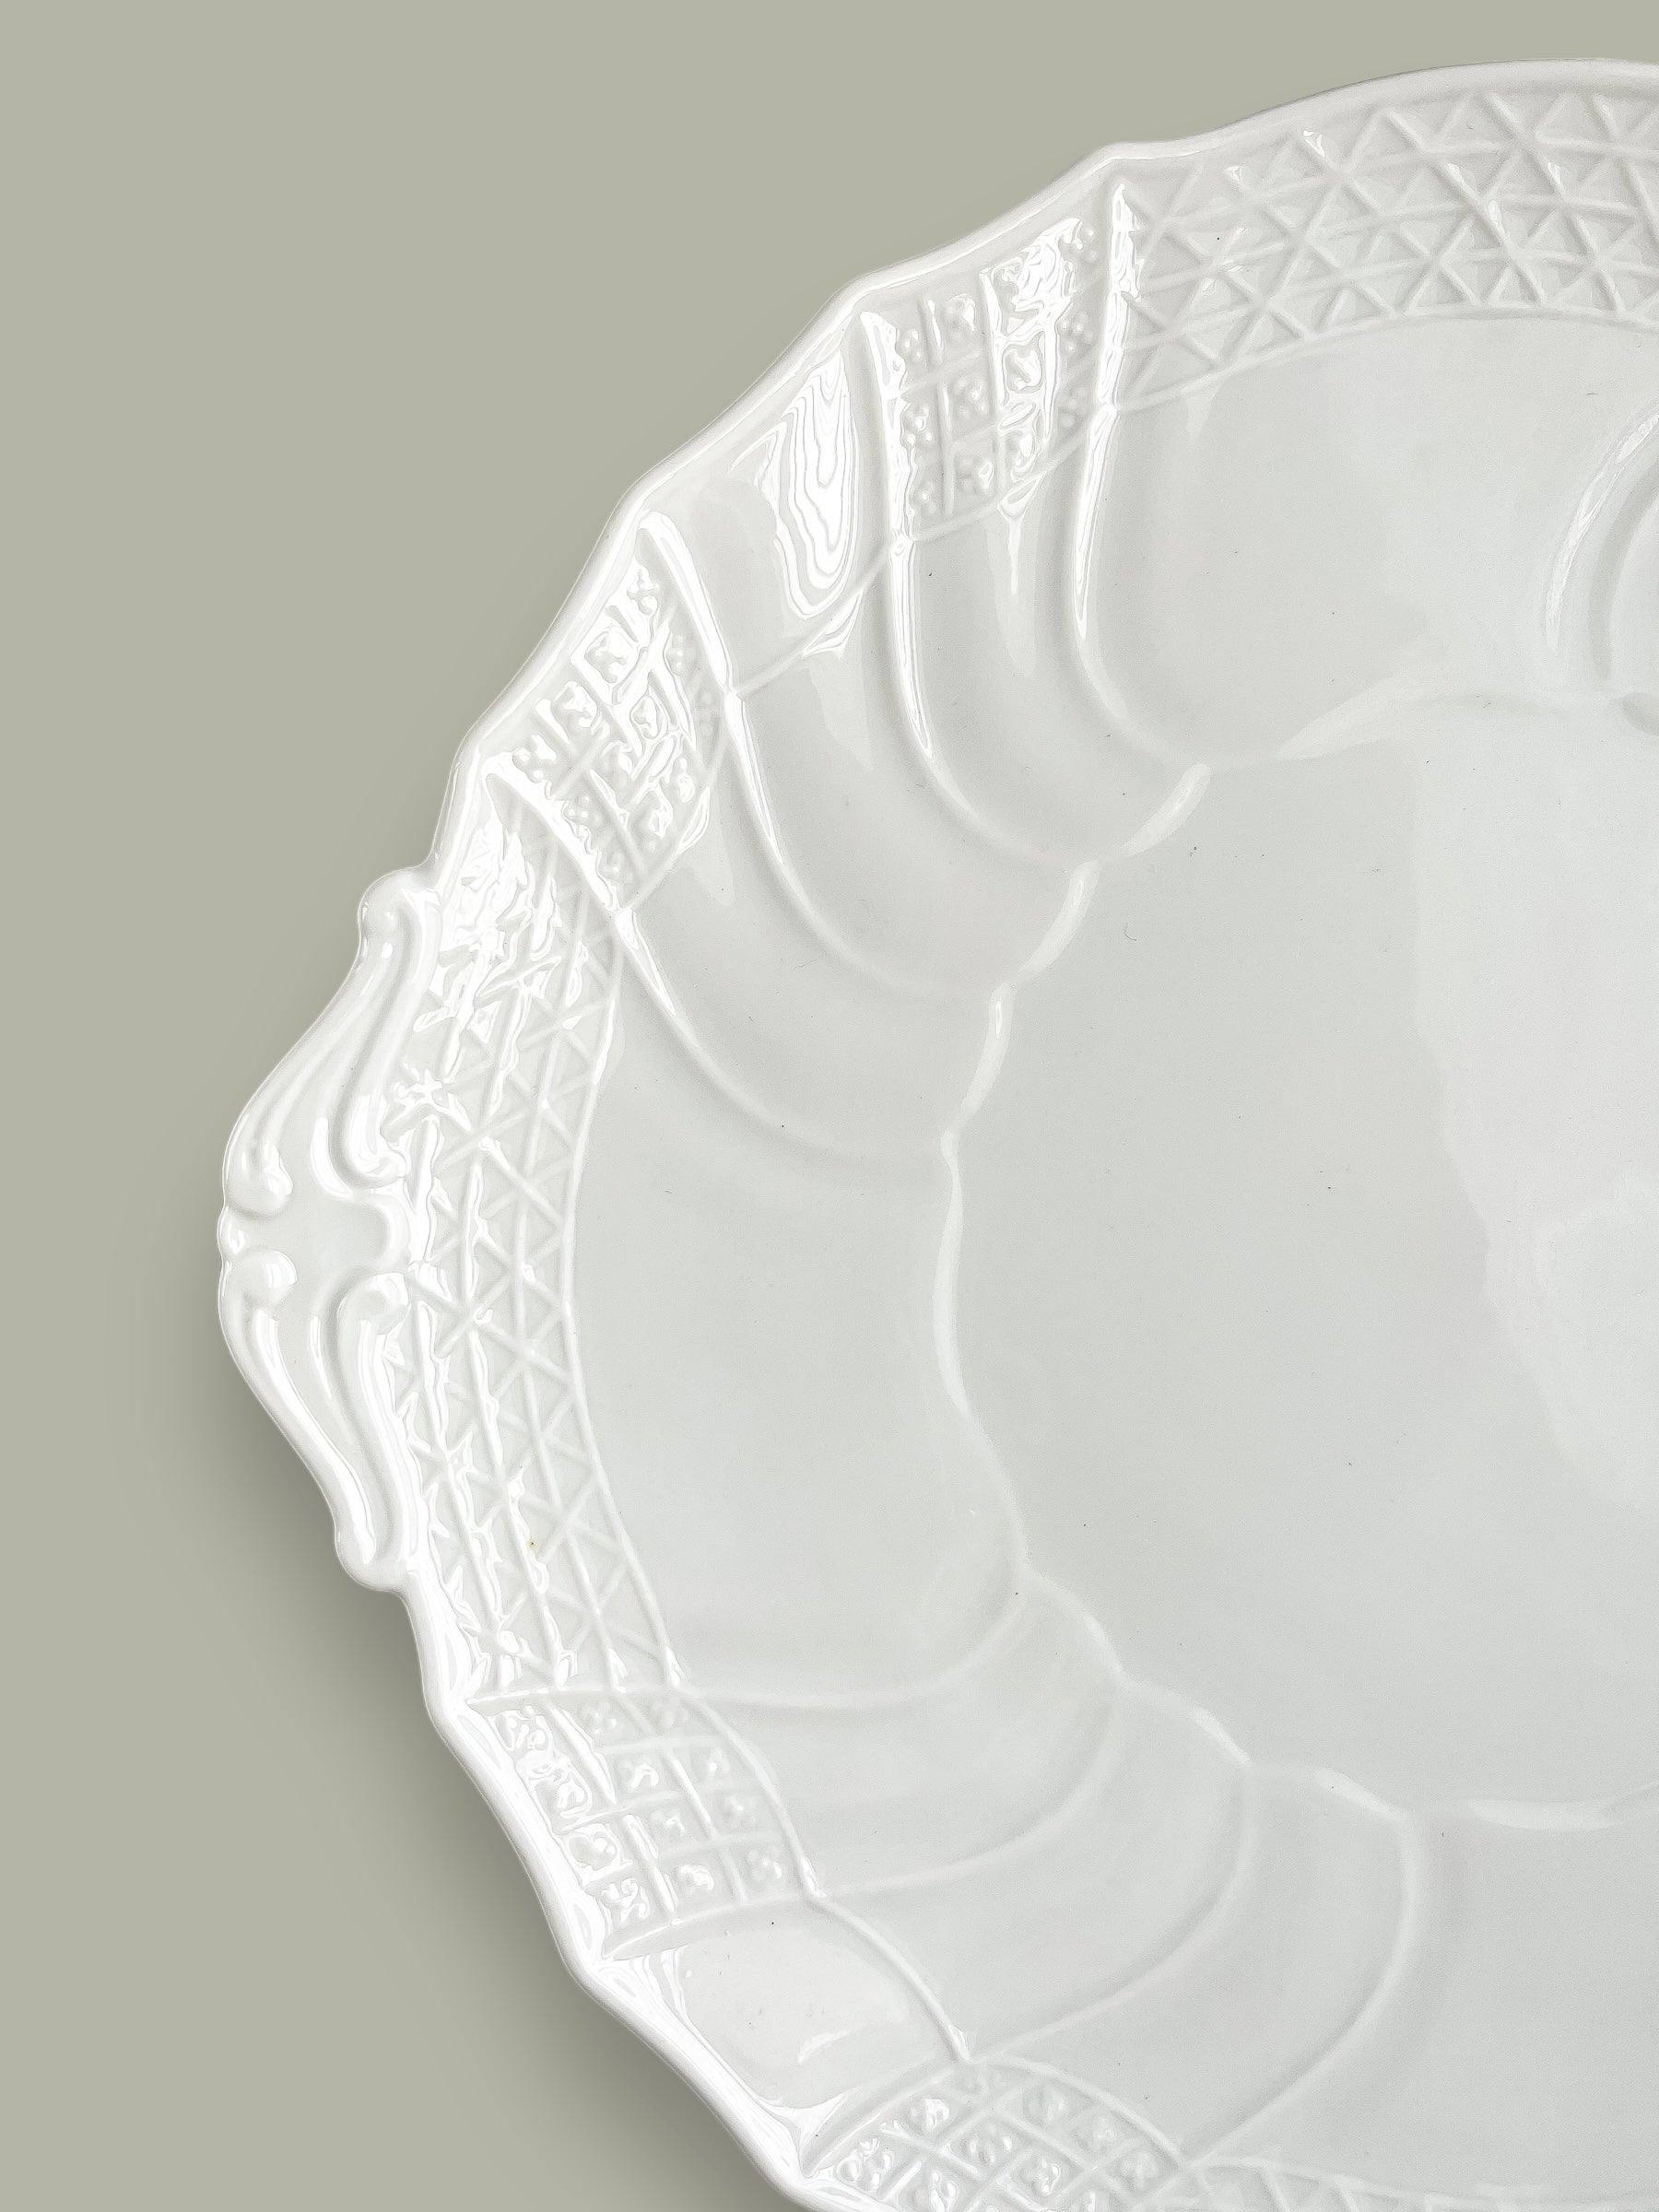 Hutschenreuther Handled Cake Plate - ‘Dresden’ Collection in All White - SOSC Home